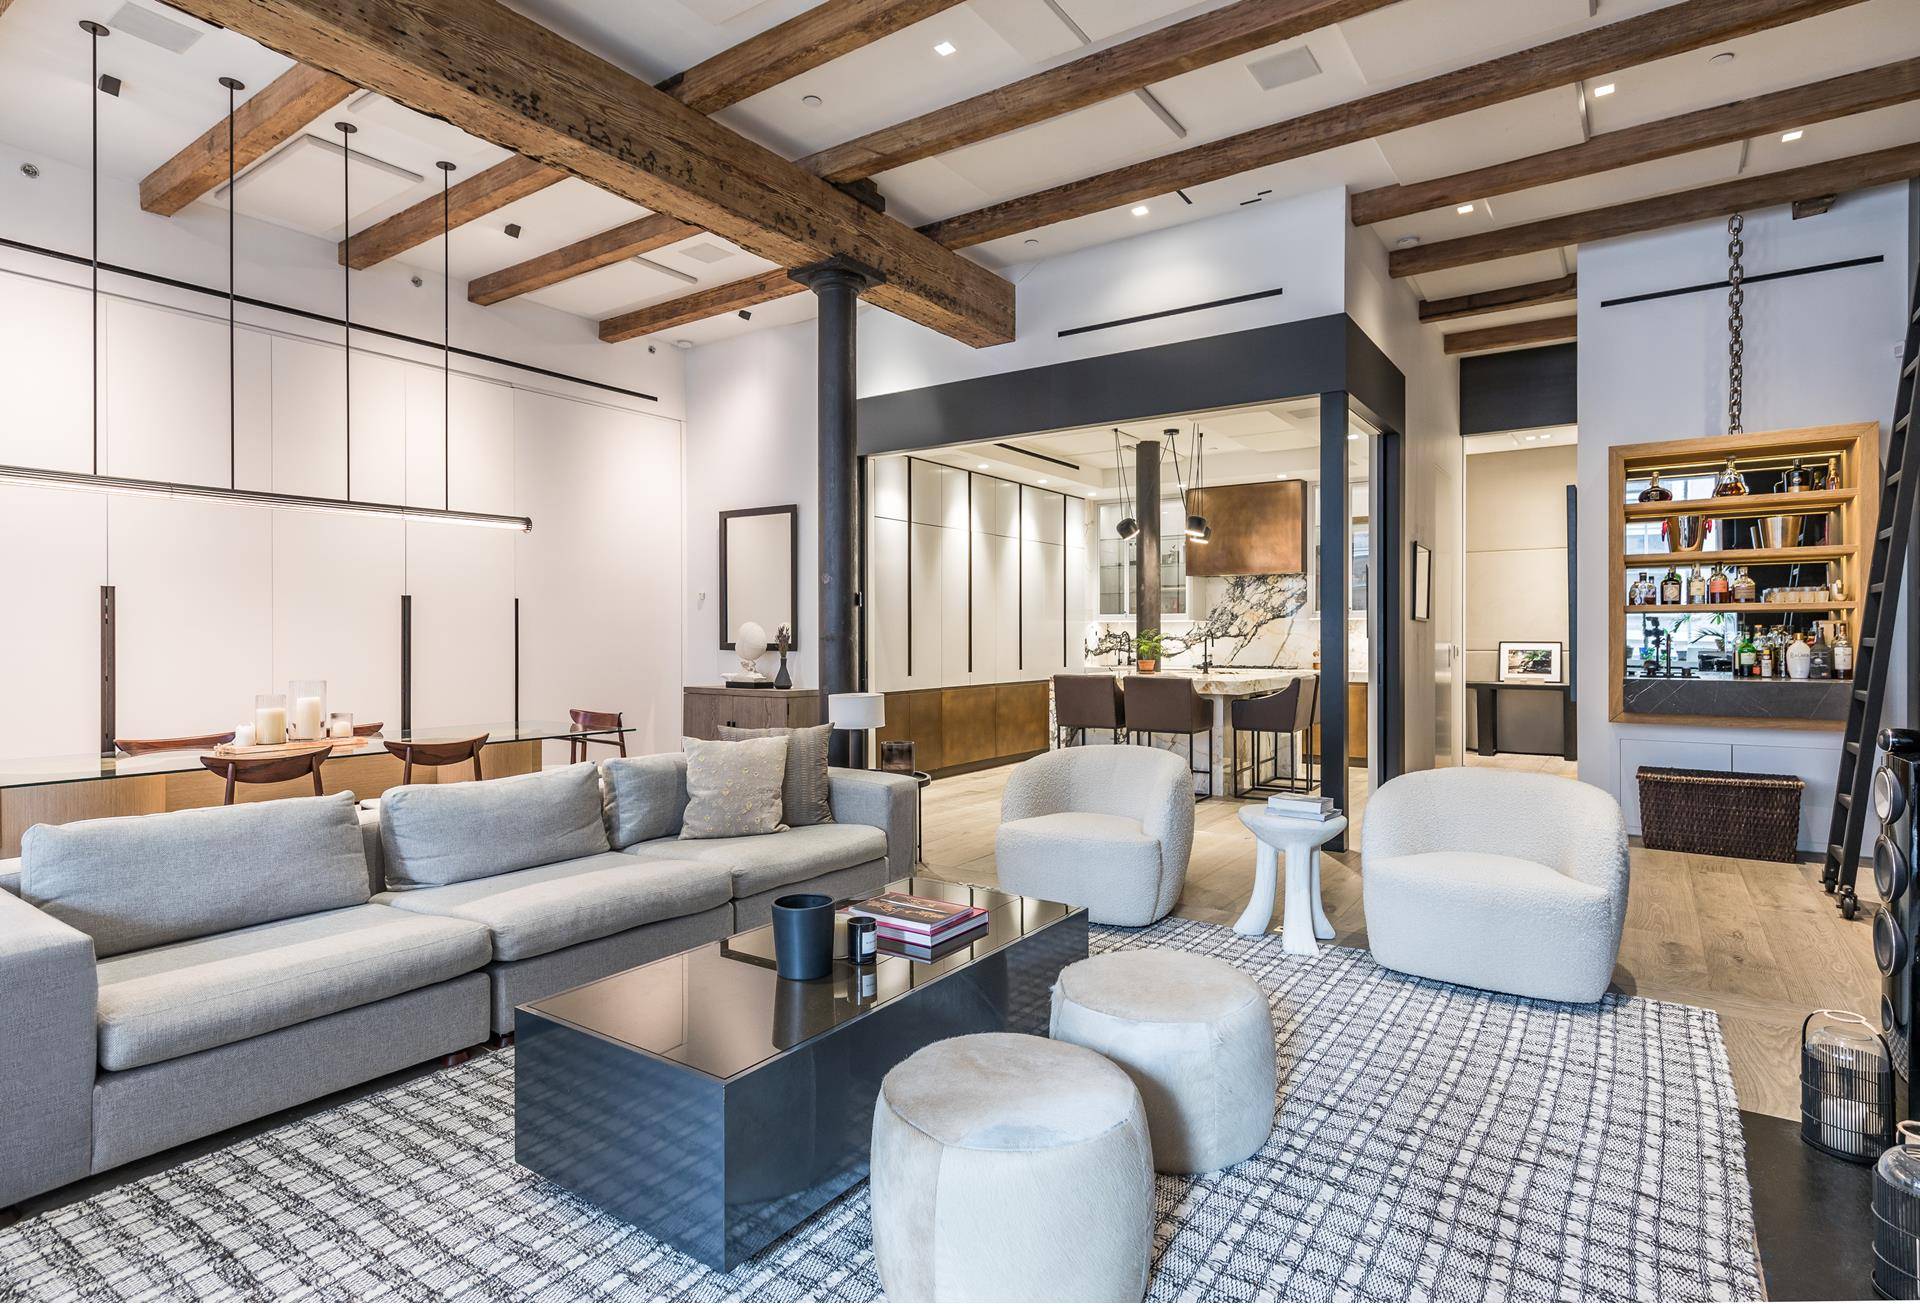 This spectacular loft in the heart of SoHo was completely gut renovated in 2017, elevating the home to a sophisticated standard of style and luxury.